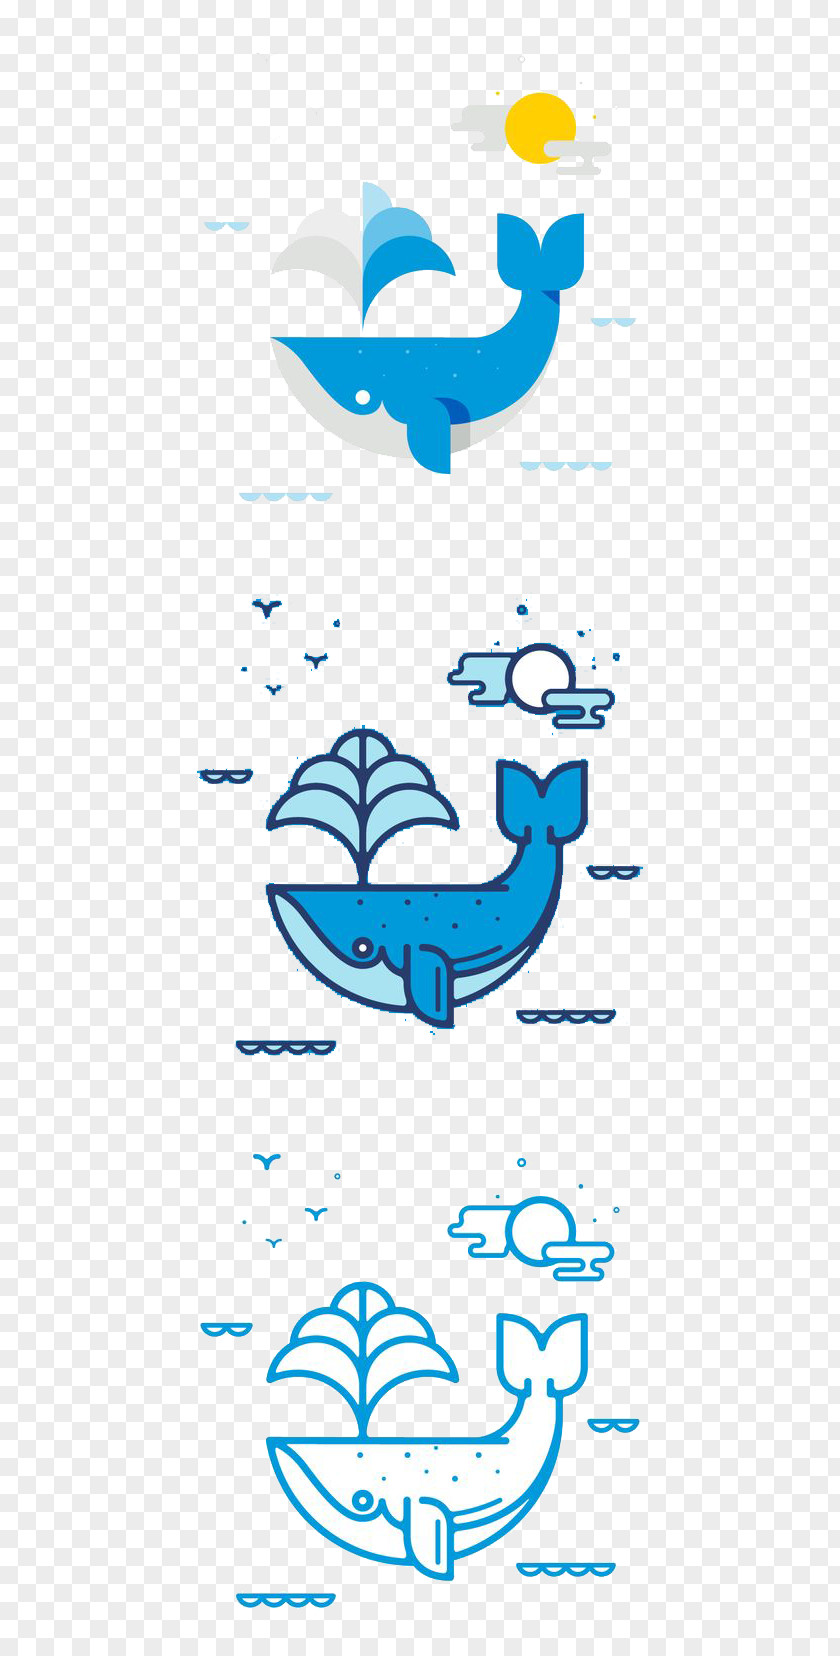 Flat Cute Whale Drawing Graphic Design Illustration PNG